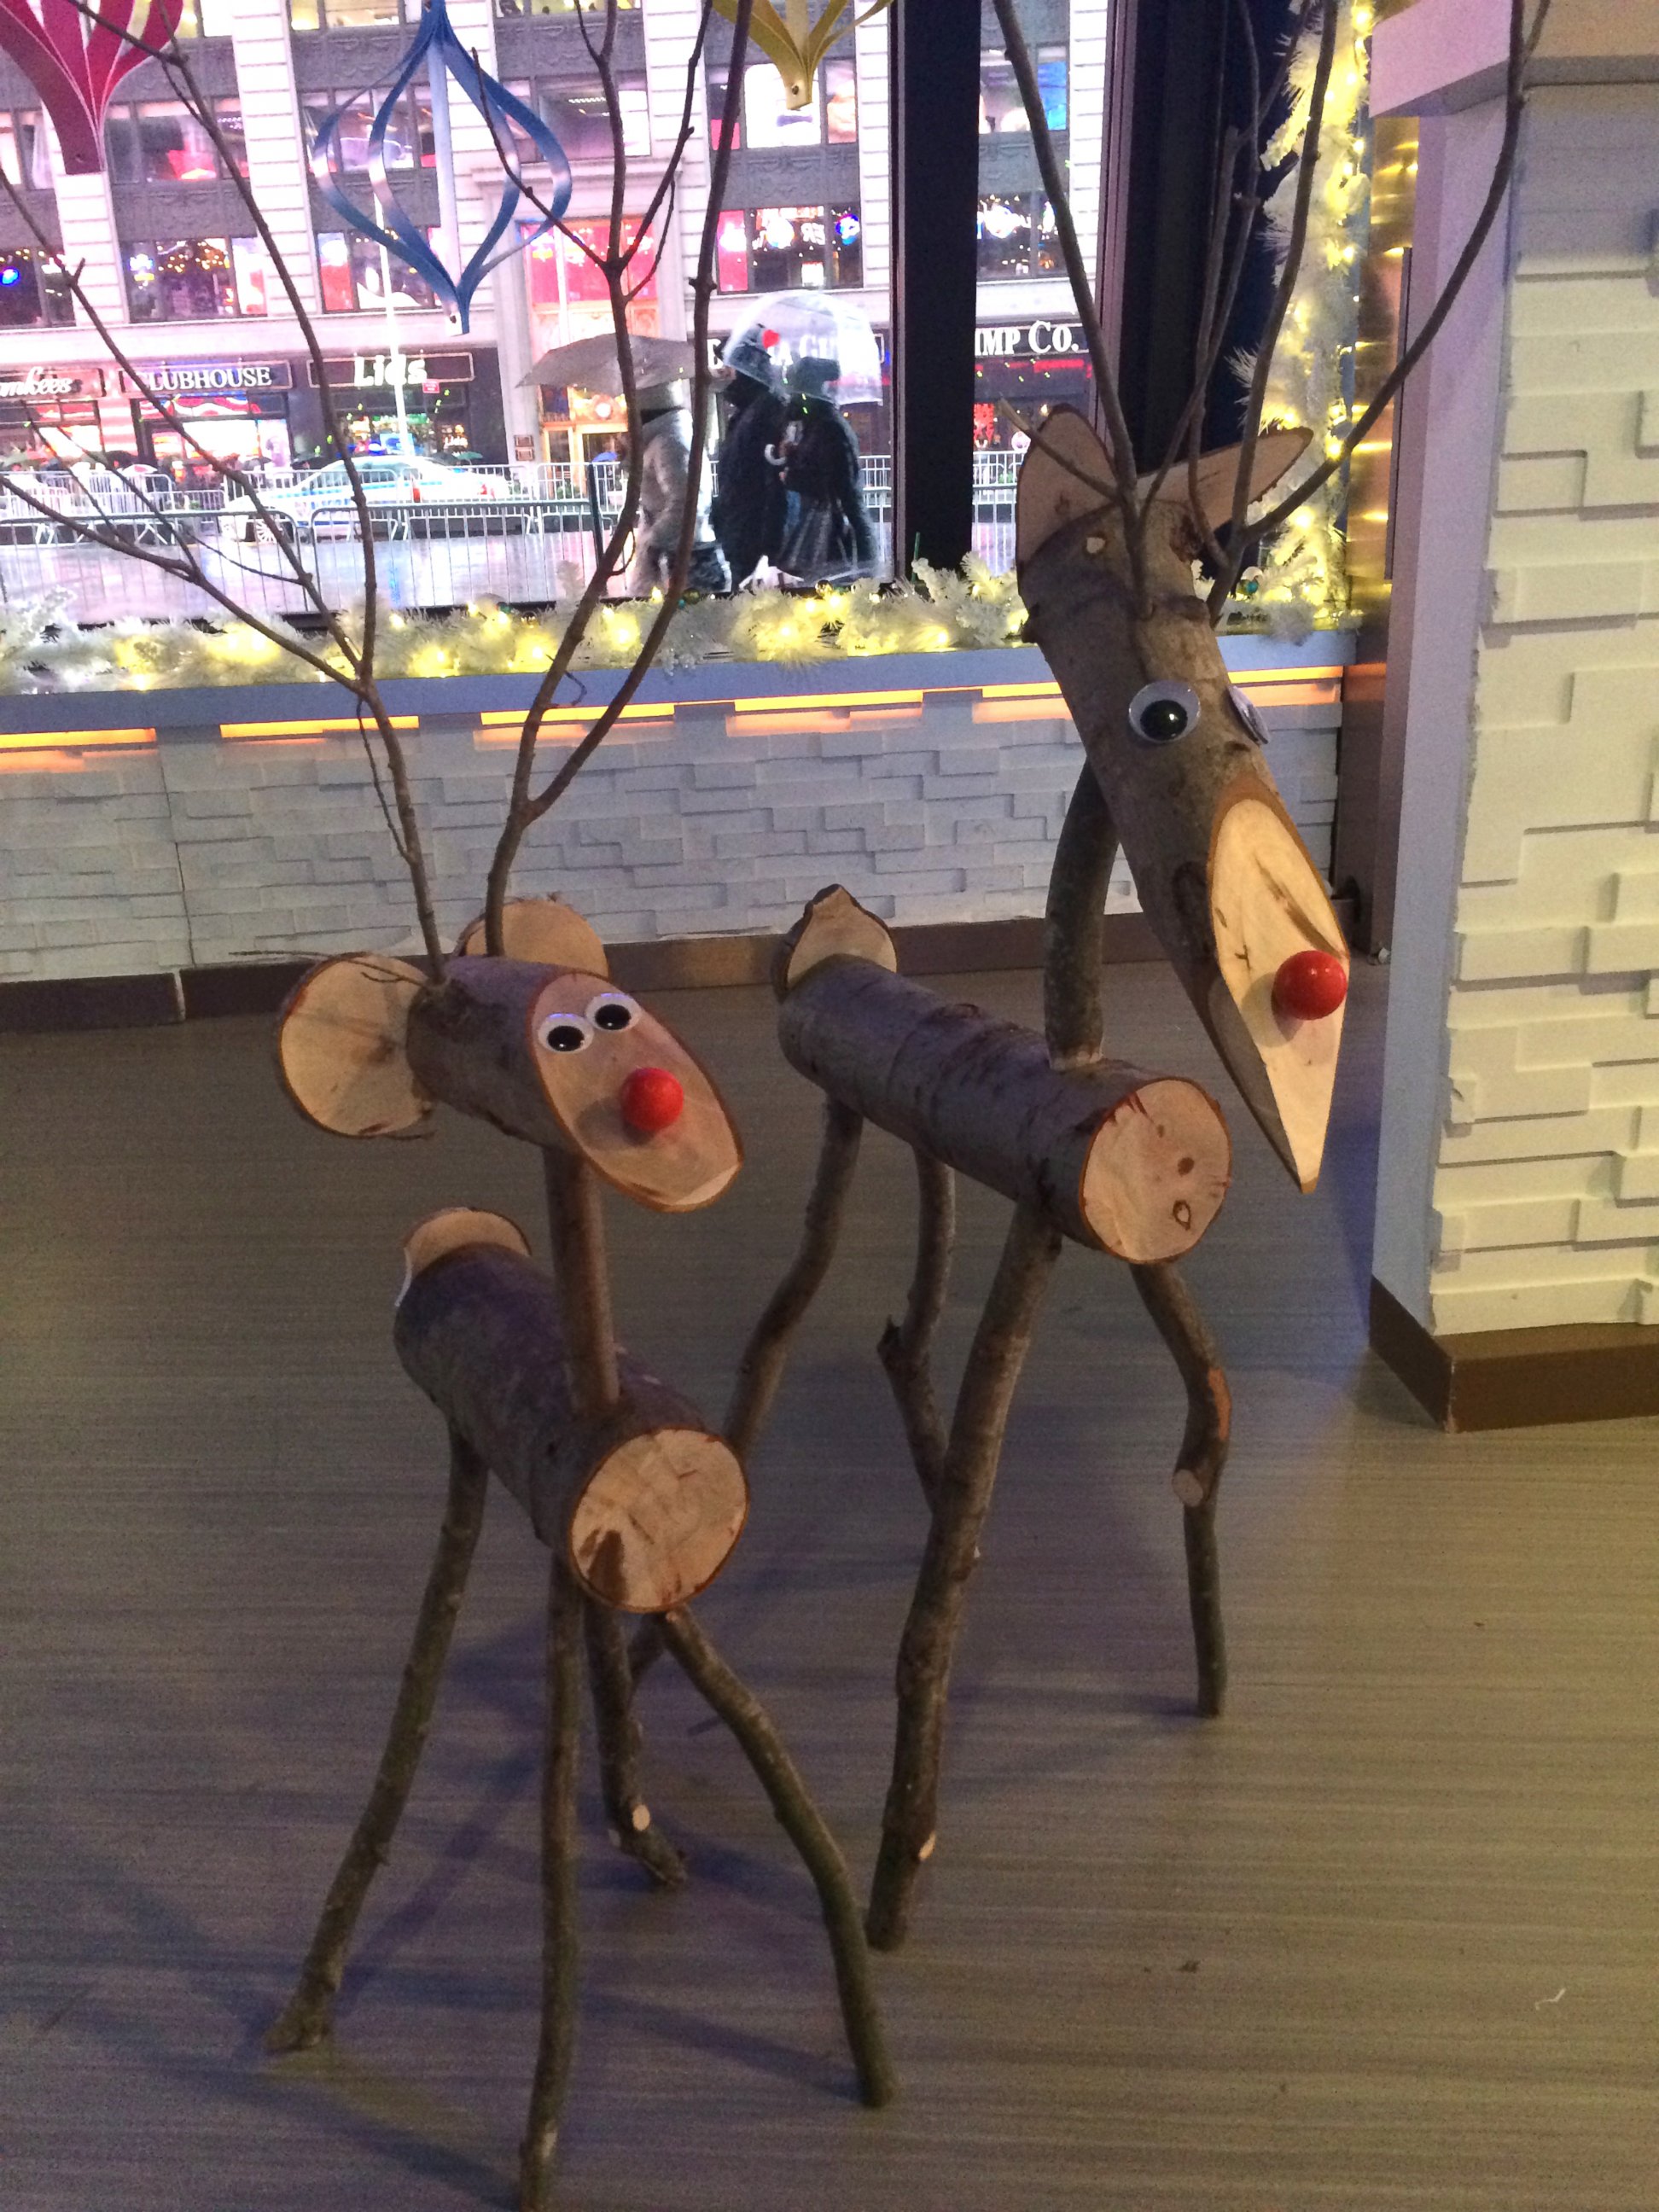 PHOTO: Deck the halls this season with DIY crafts like these log reindeer.